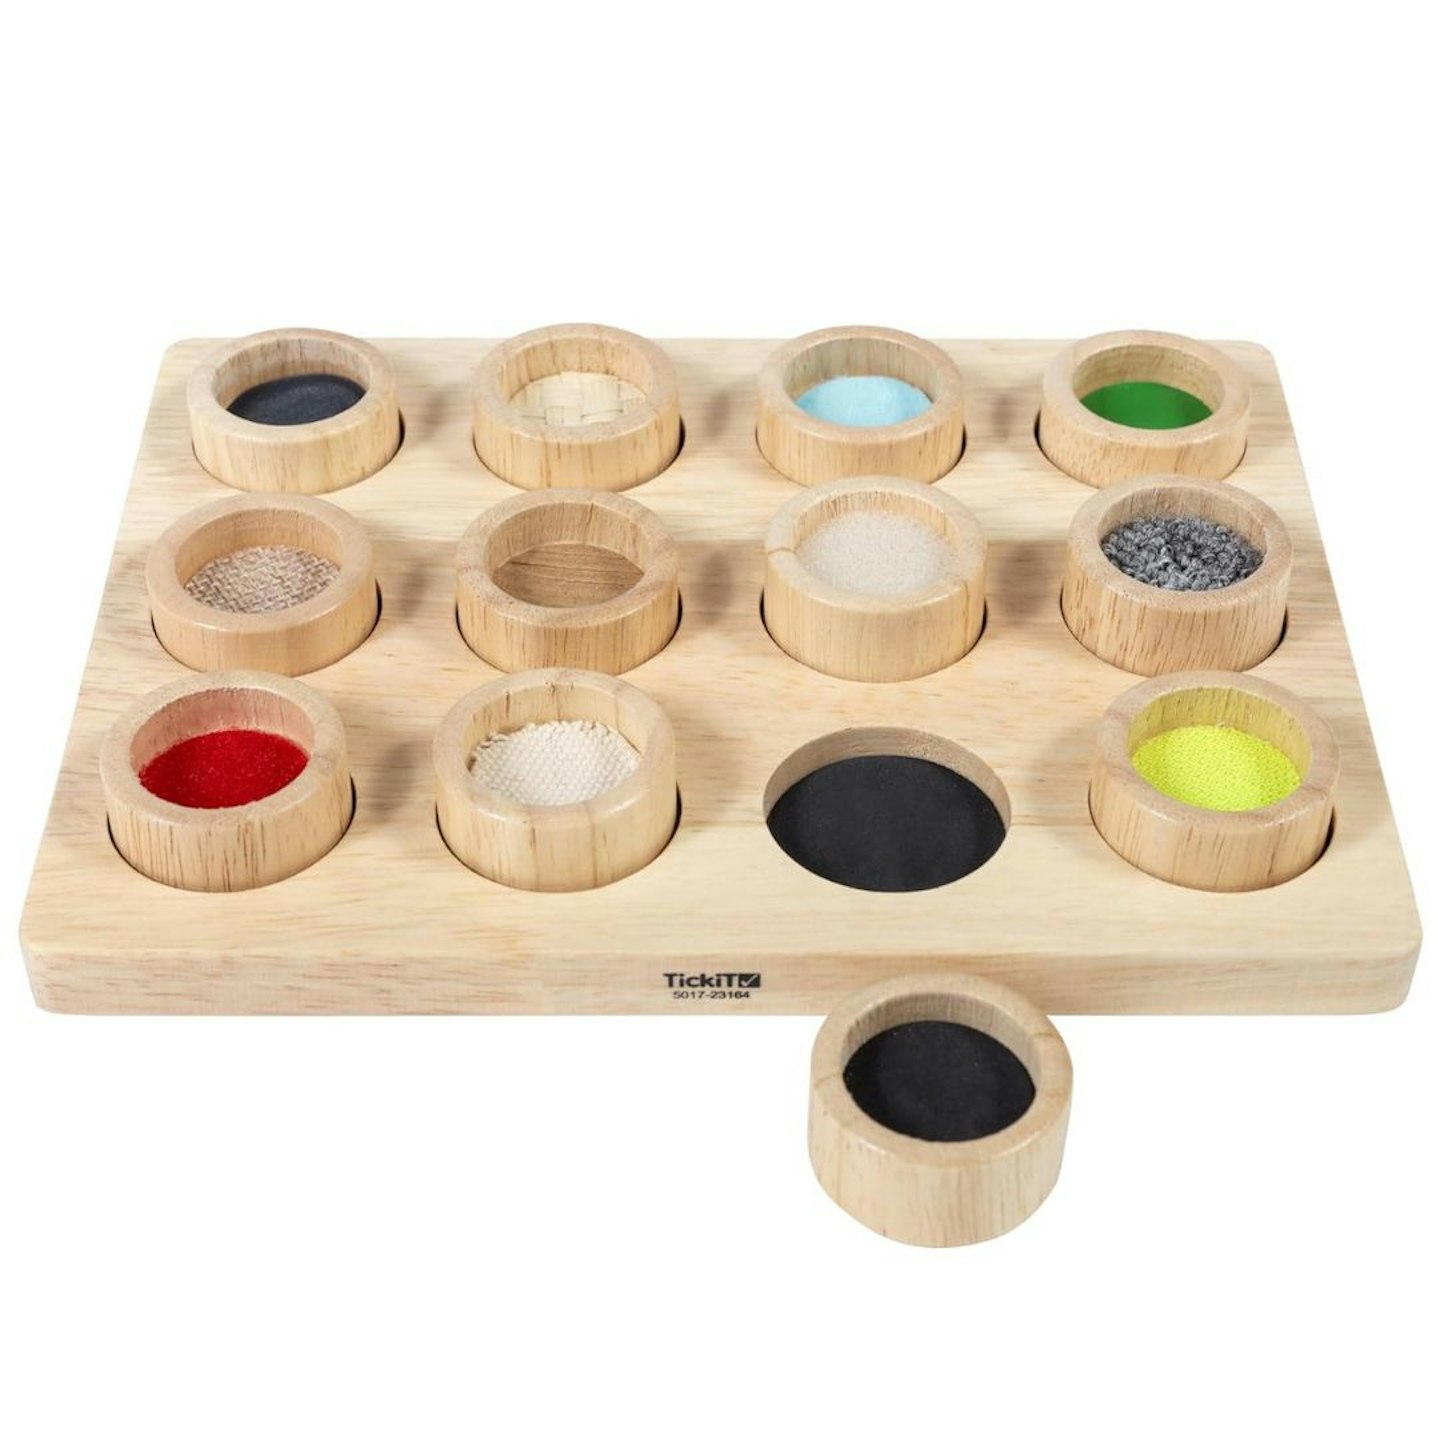 The Best Wooden Children's Toys: TickiT 72101 Touch and Match Board